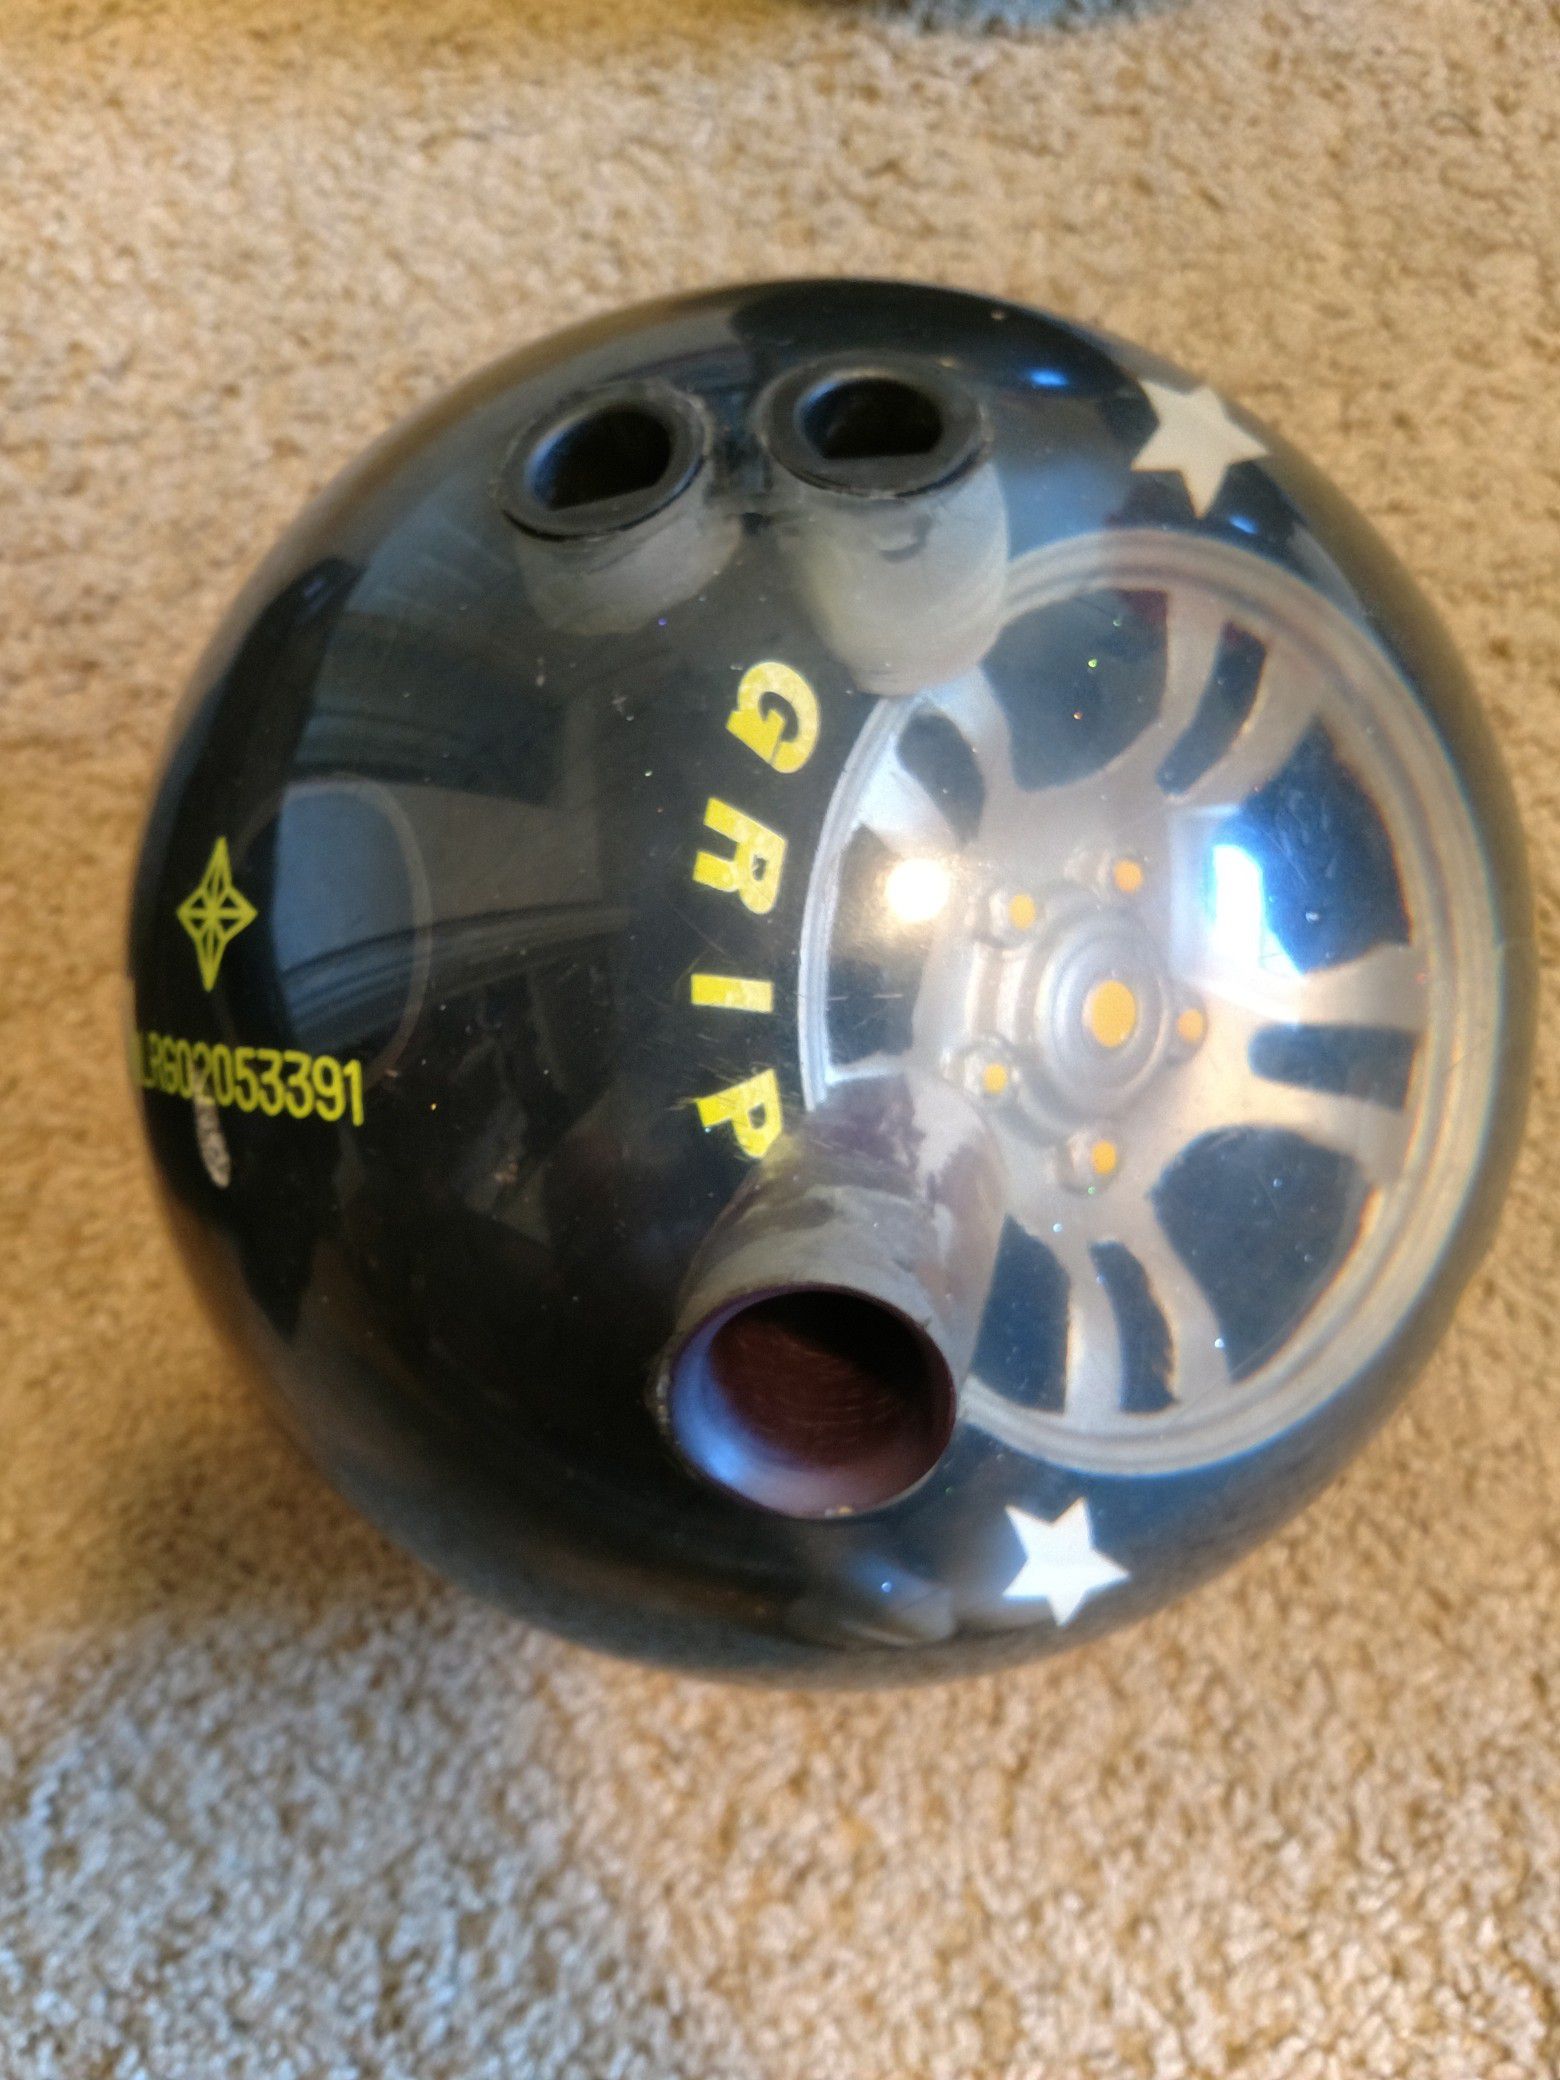 Roto Grip Spare Tire - 15 lbs bowling ball for Sale in Grand